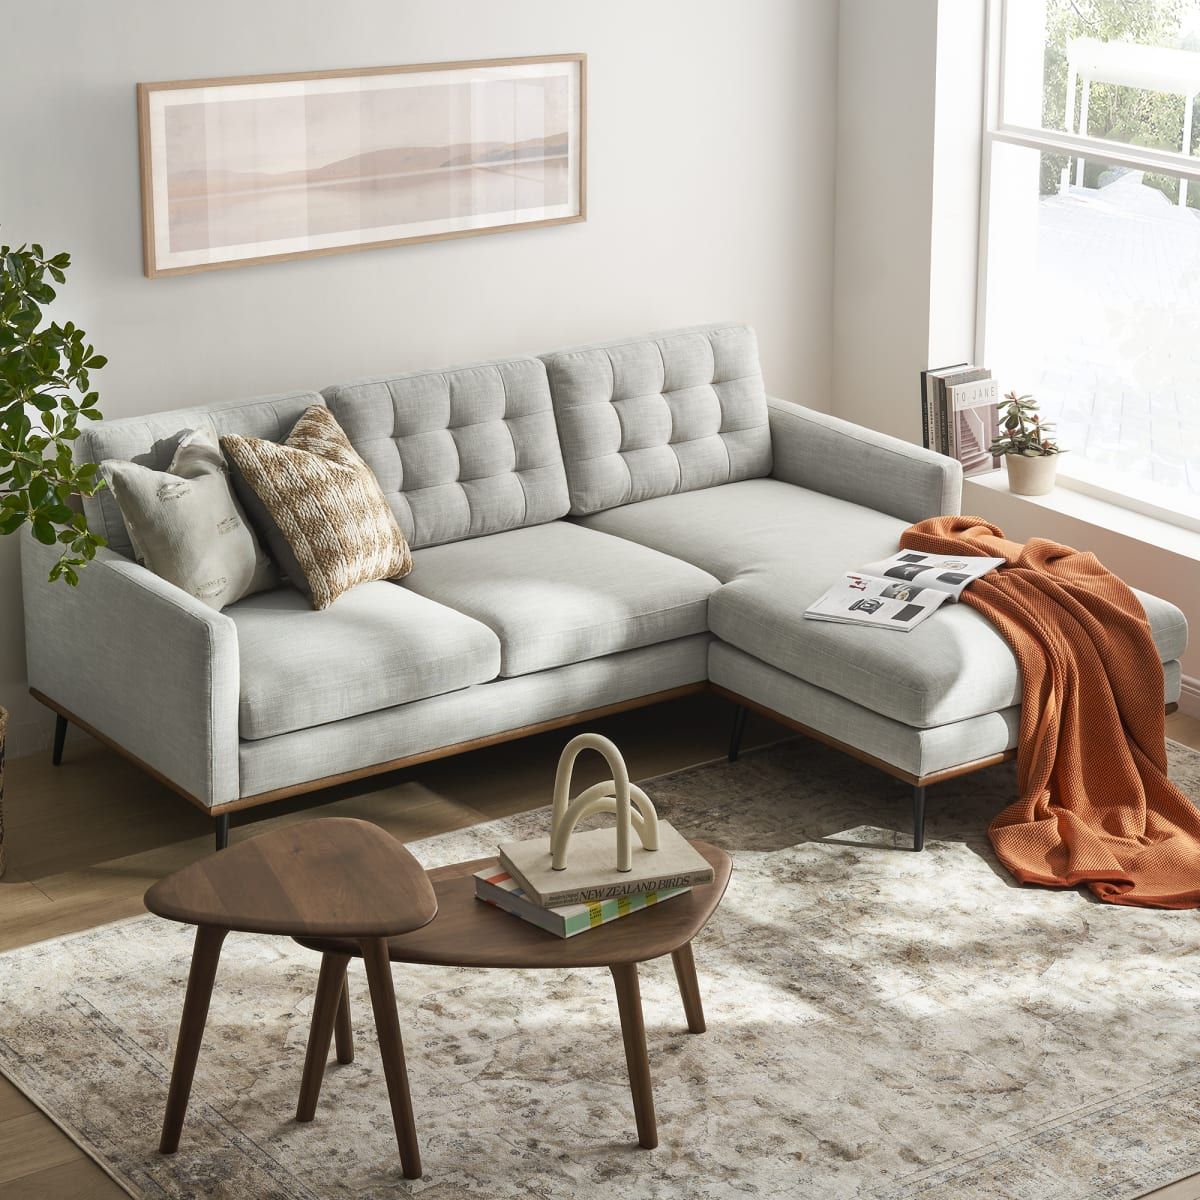 Finding the Perfect Fit: How to Choose
the Right Small Sectional Sofa for Your Space